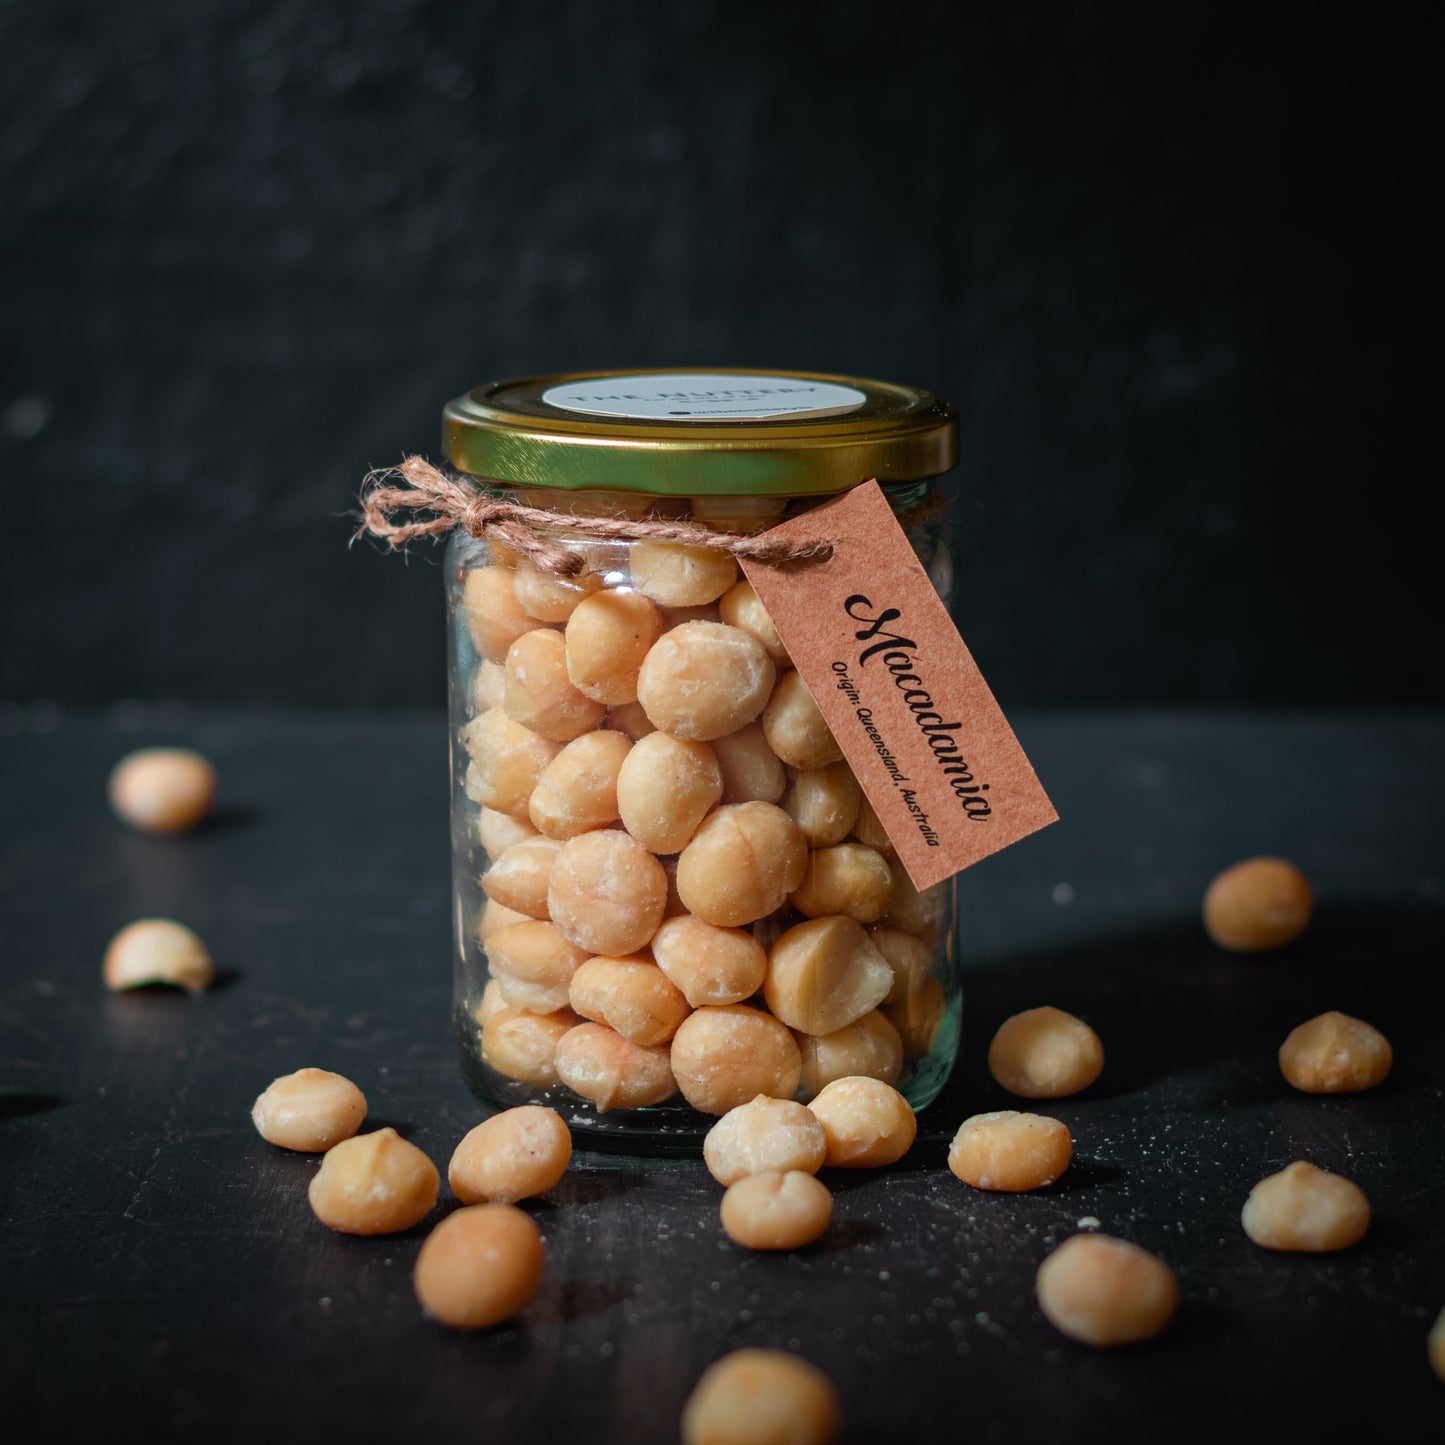 Salted Macadamia - The Nuttery